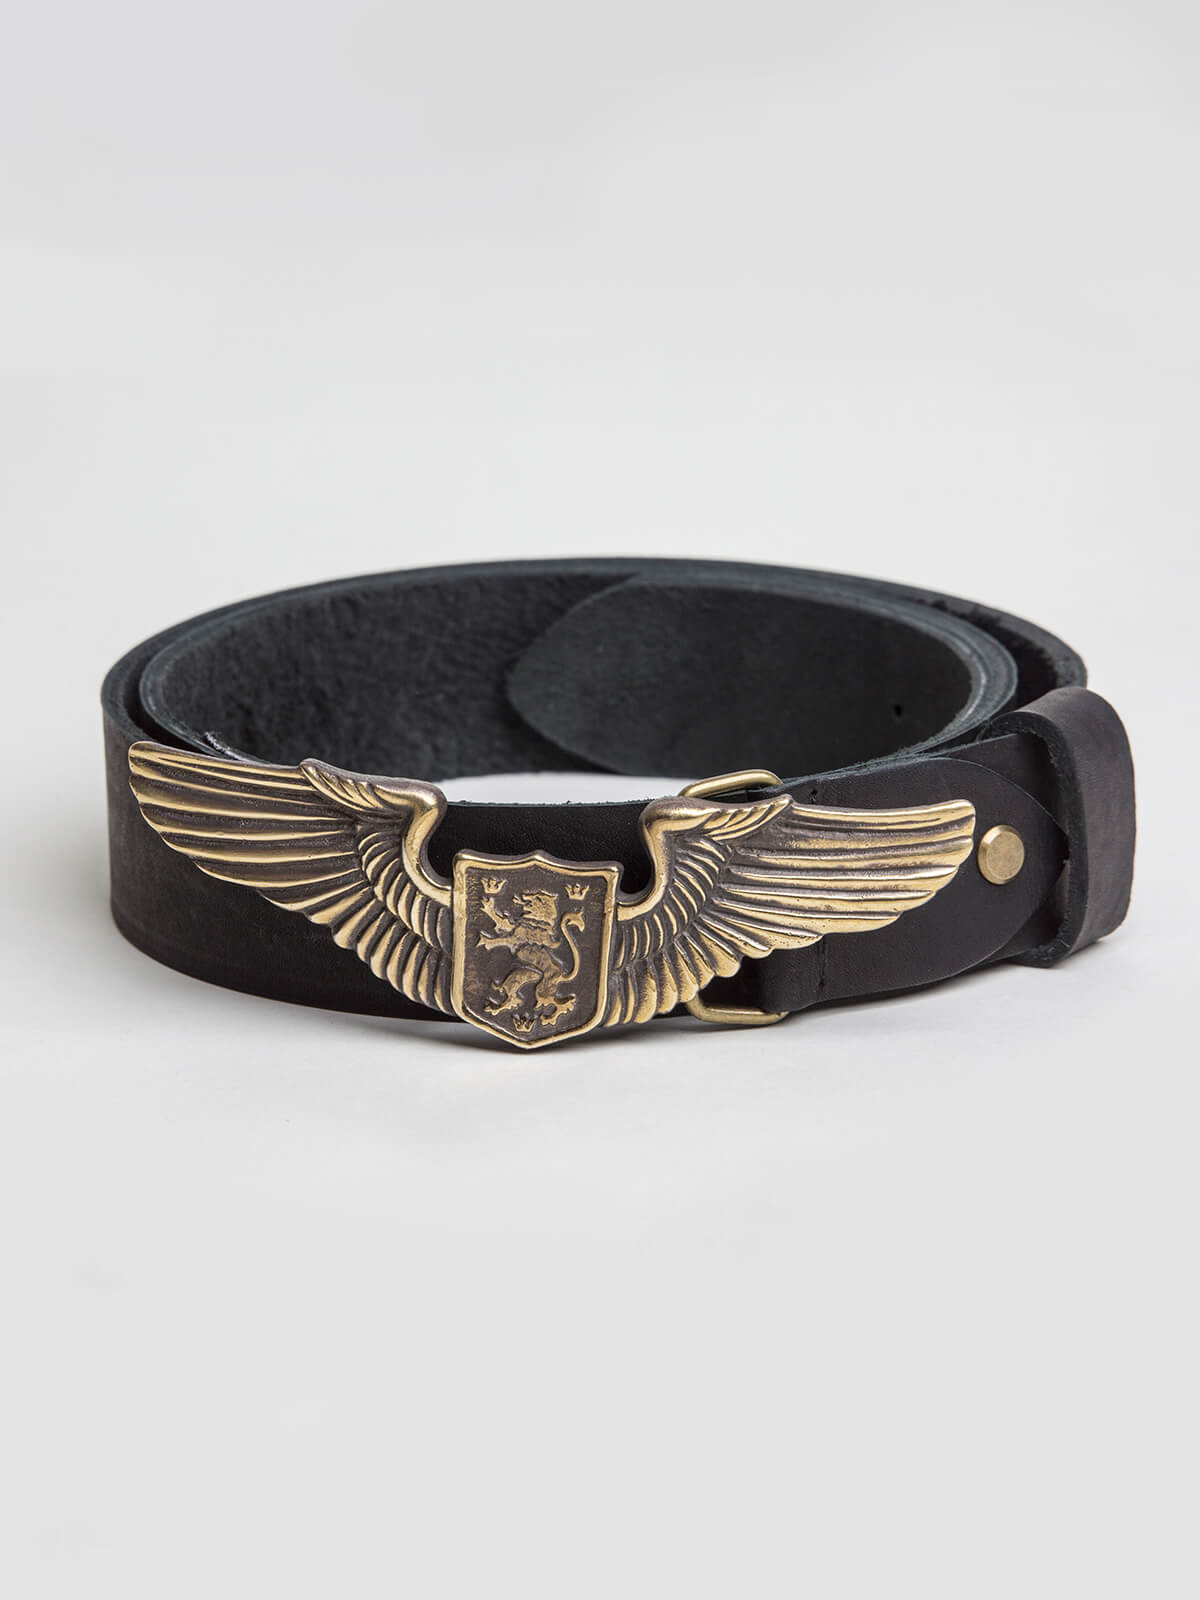 Belt Wings. Color black. Length: 125 cm
Material: leather and brass.